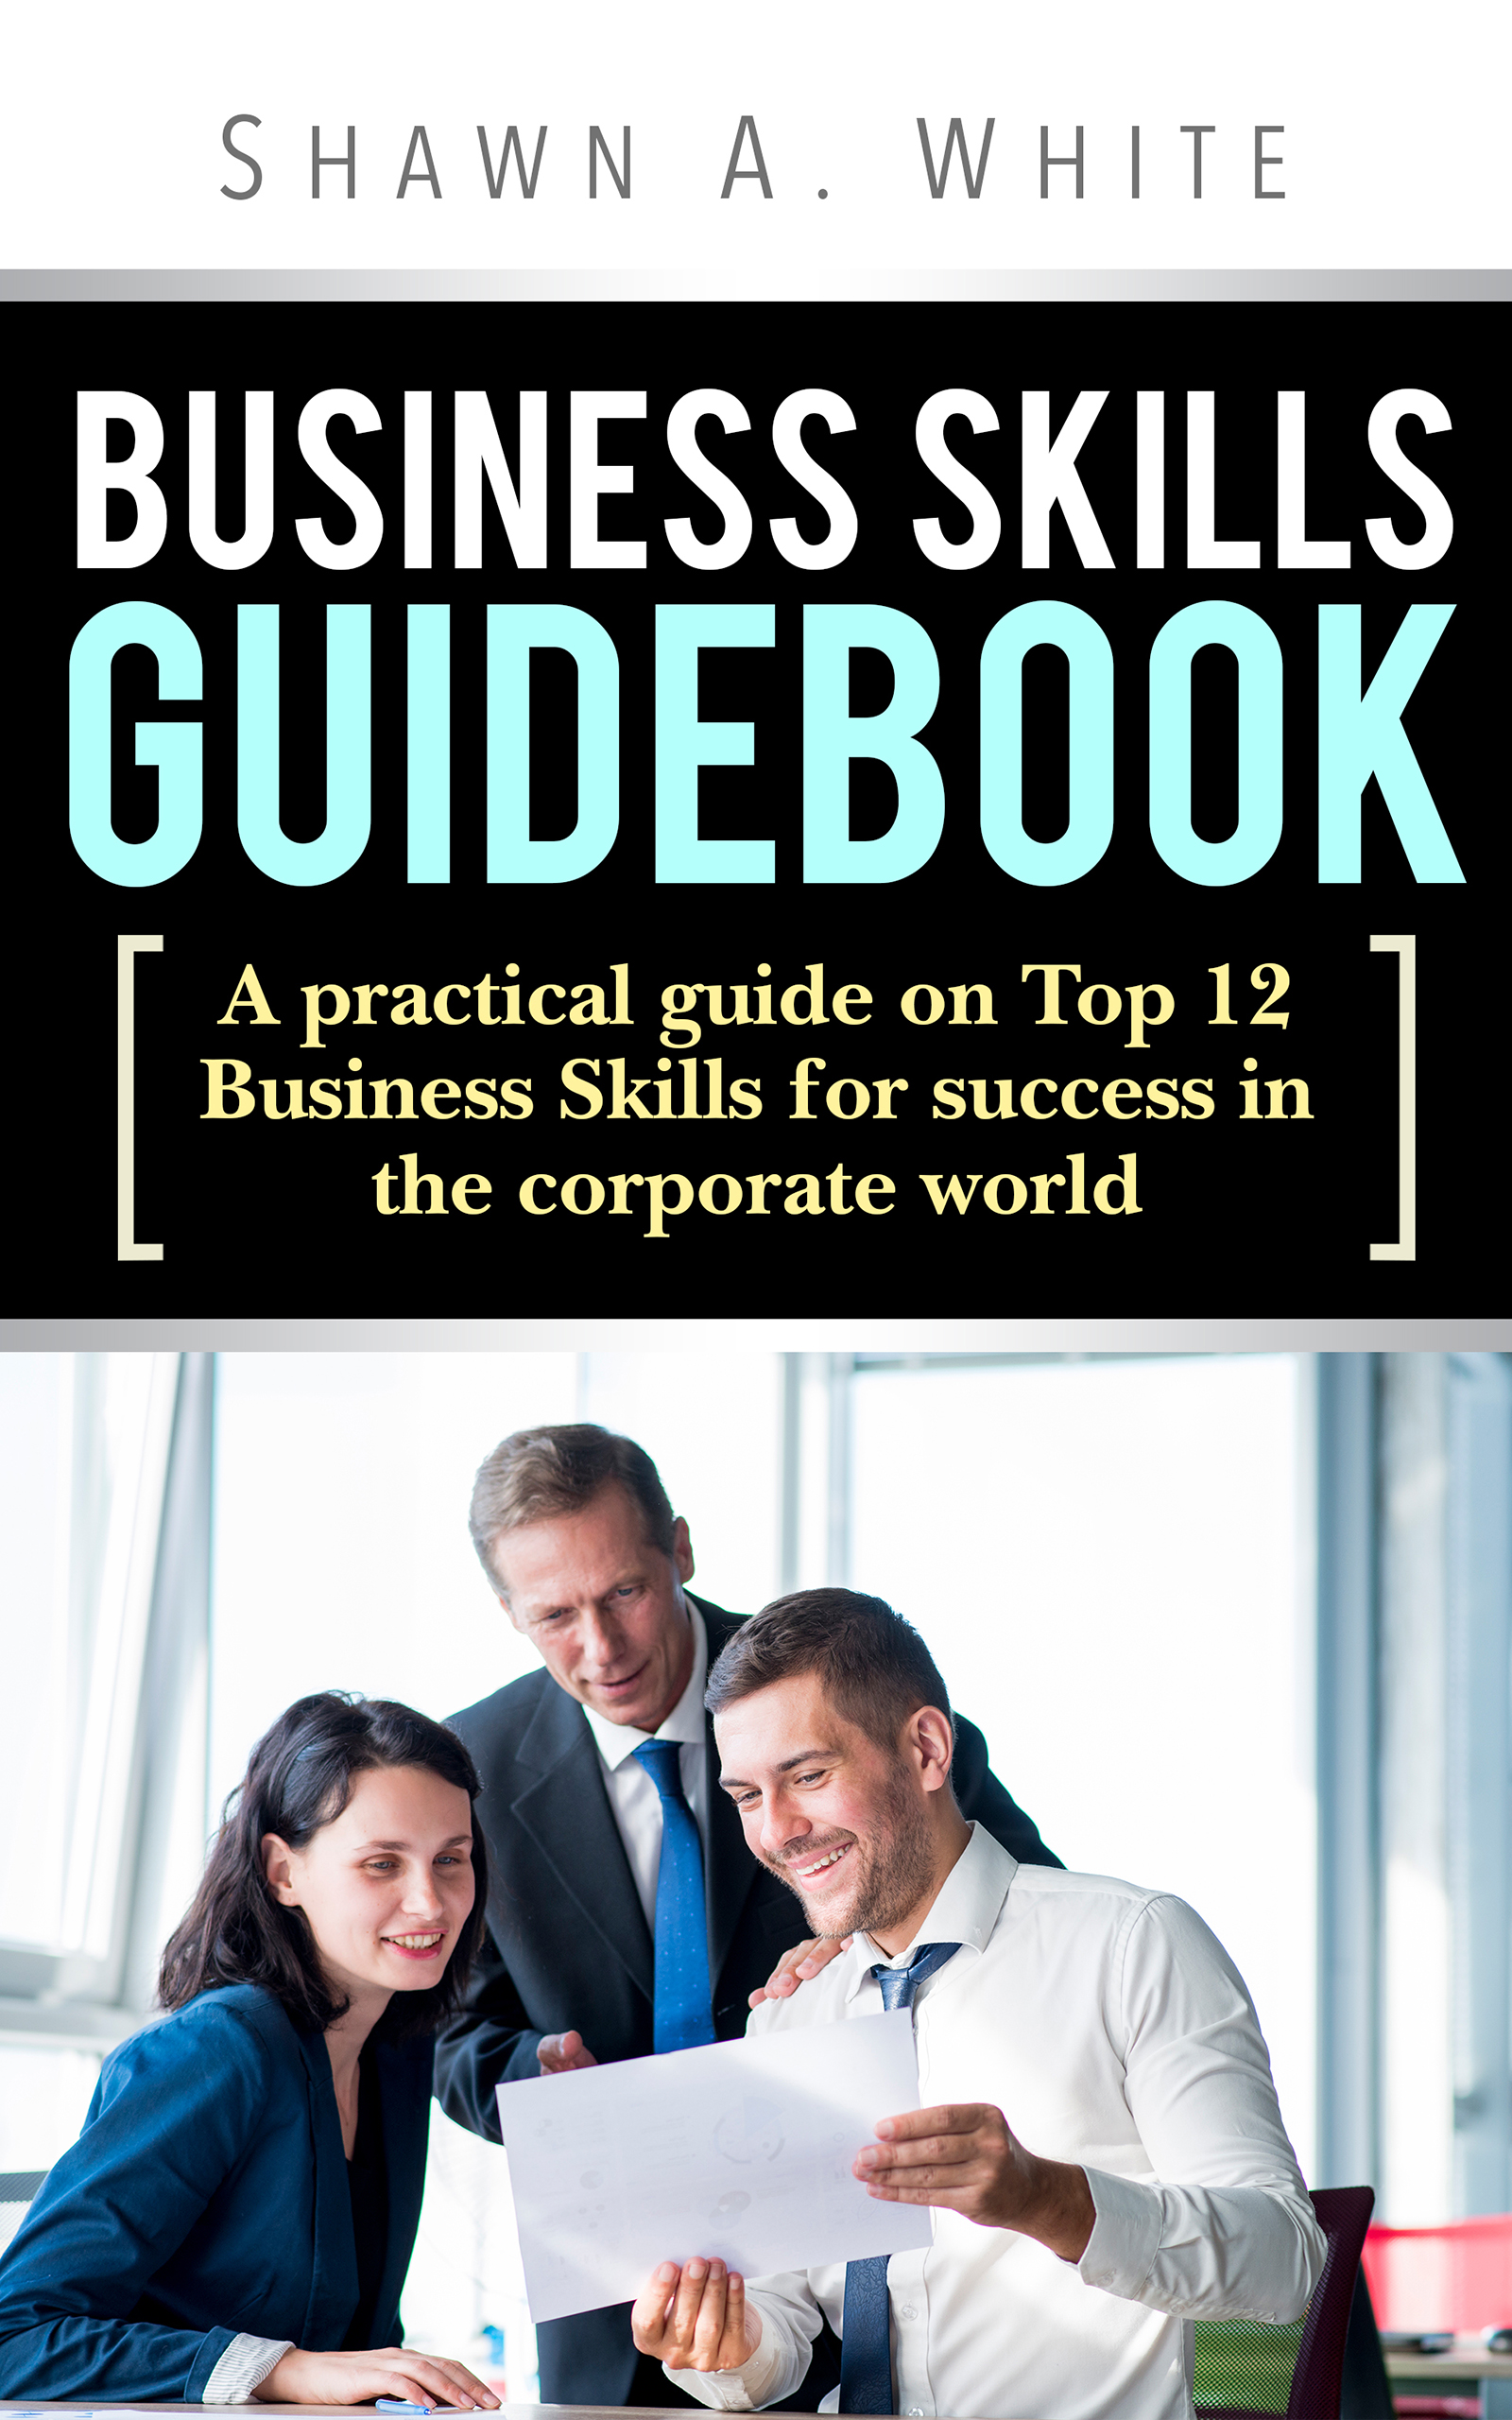 FREE: Business Skills Guidebook by Shawn A. White